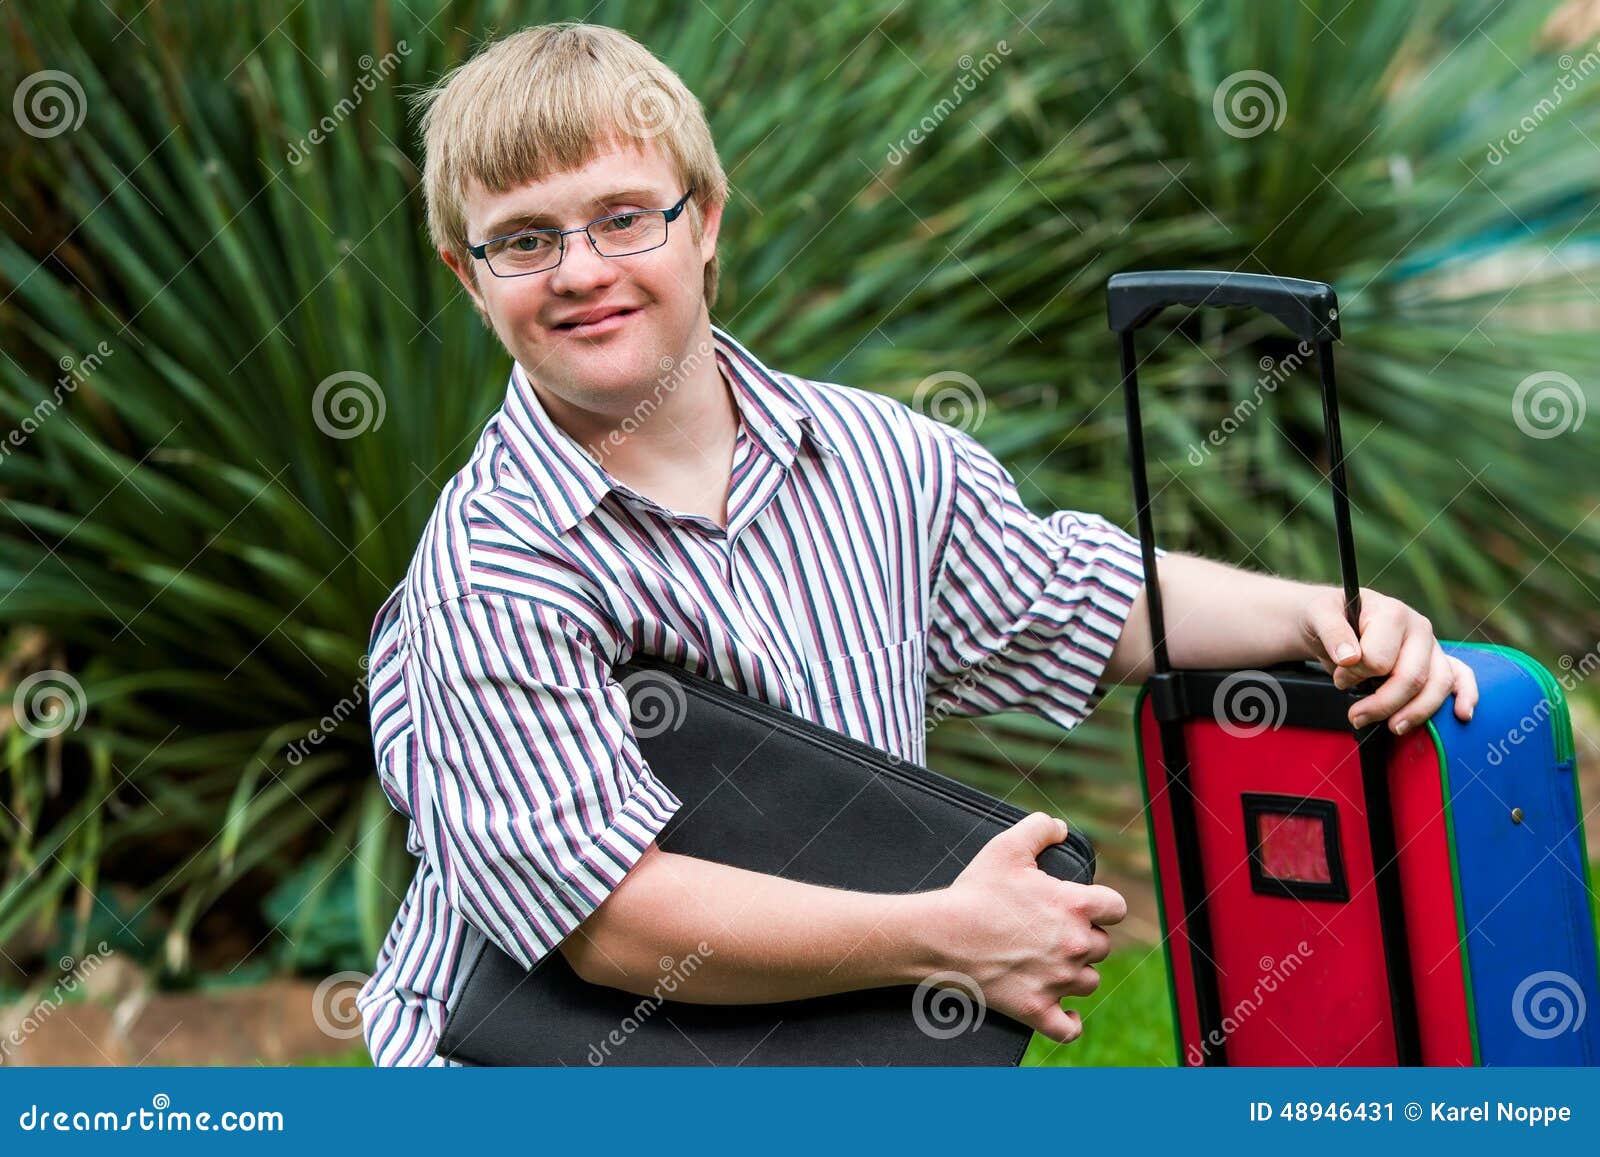 down syndrome student with file and trolley.